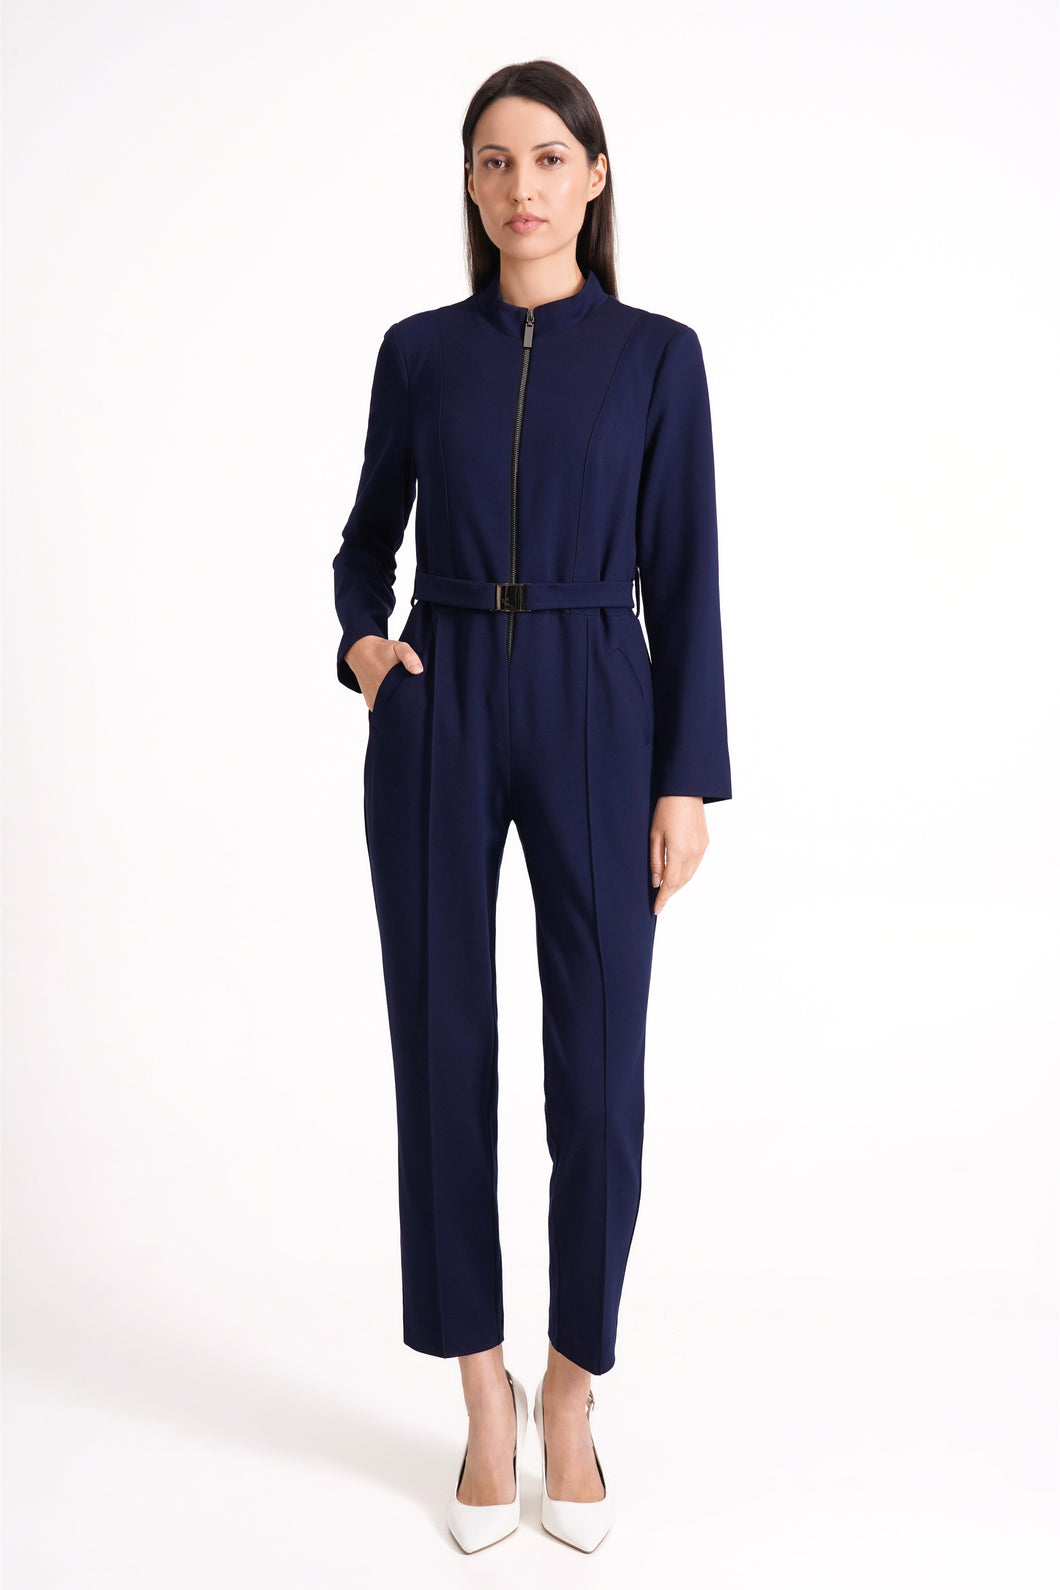 Navy high neck jumpsuit with sleeves